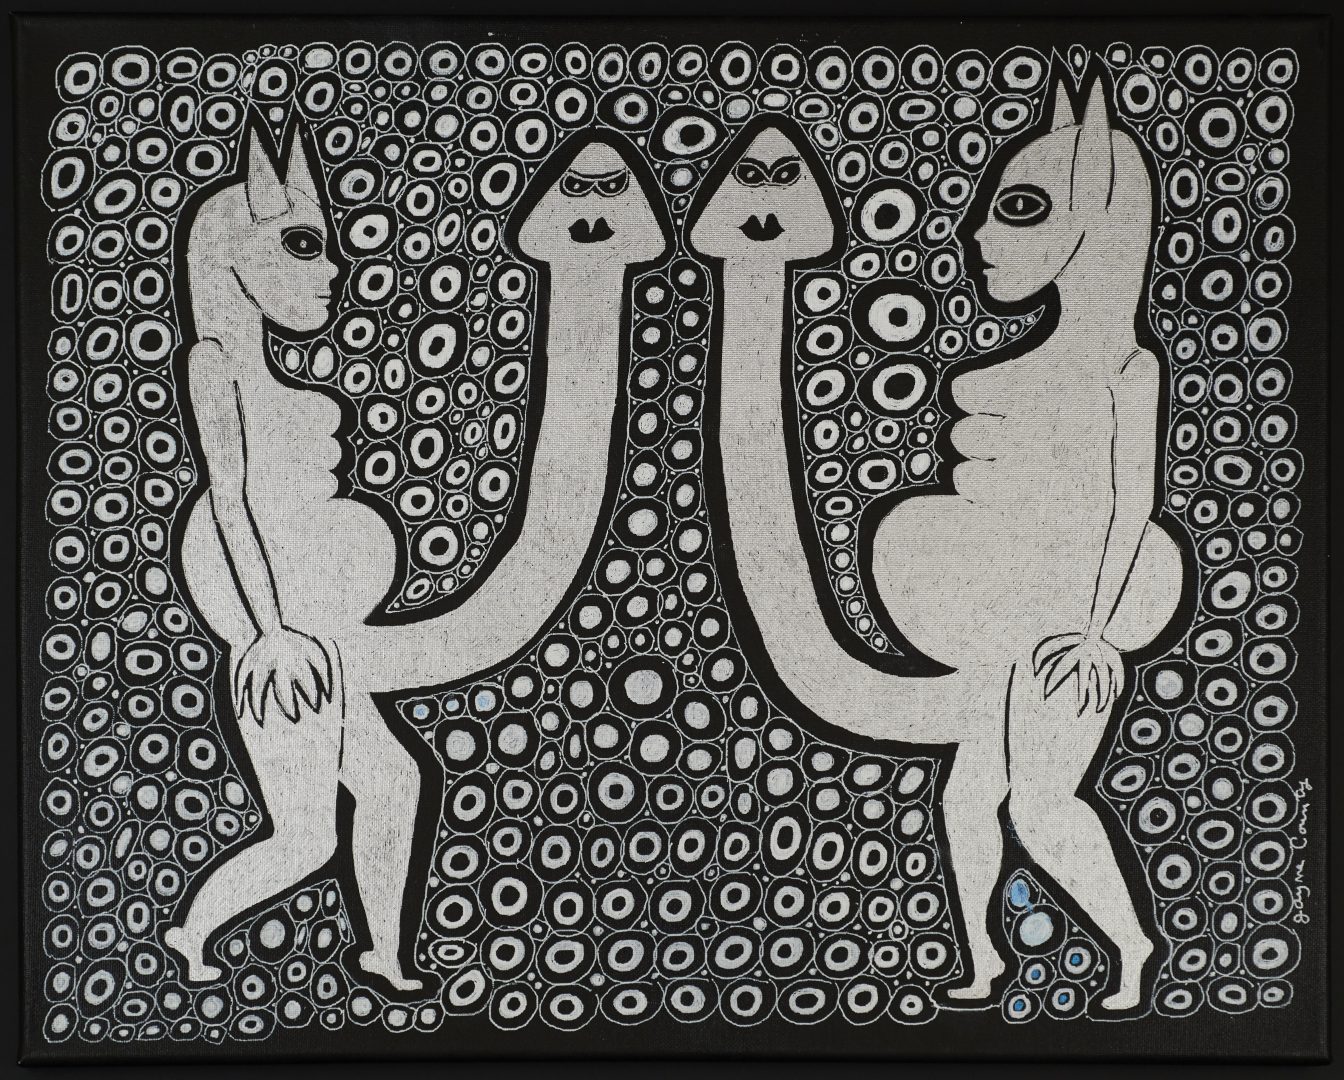 A painting by Jayne county depicts 2 figures with large penises erect and facing each other